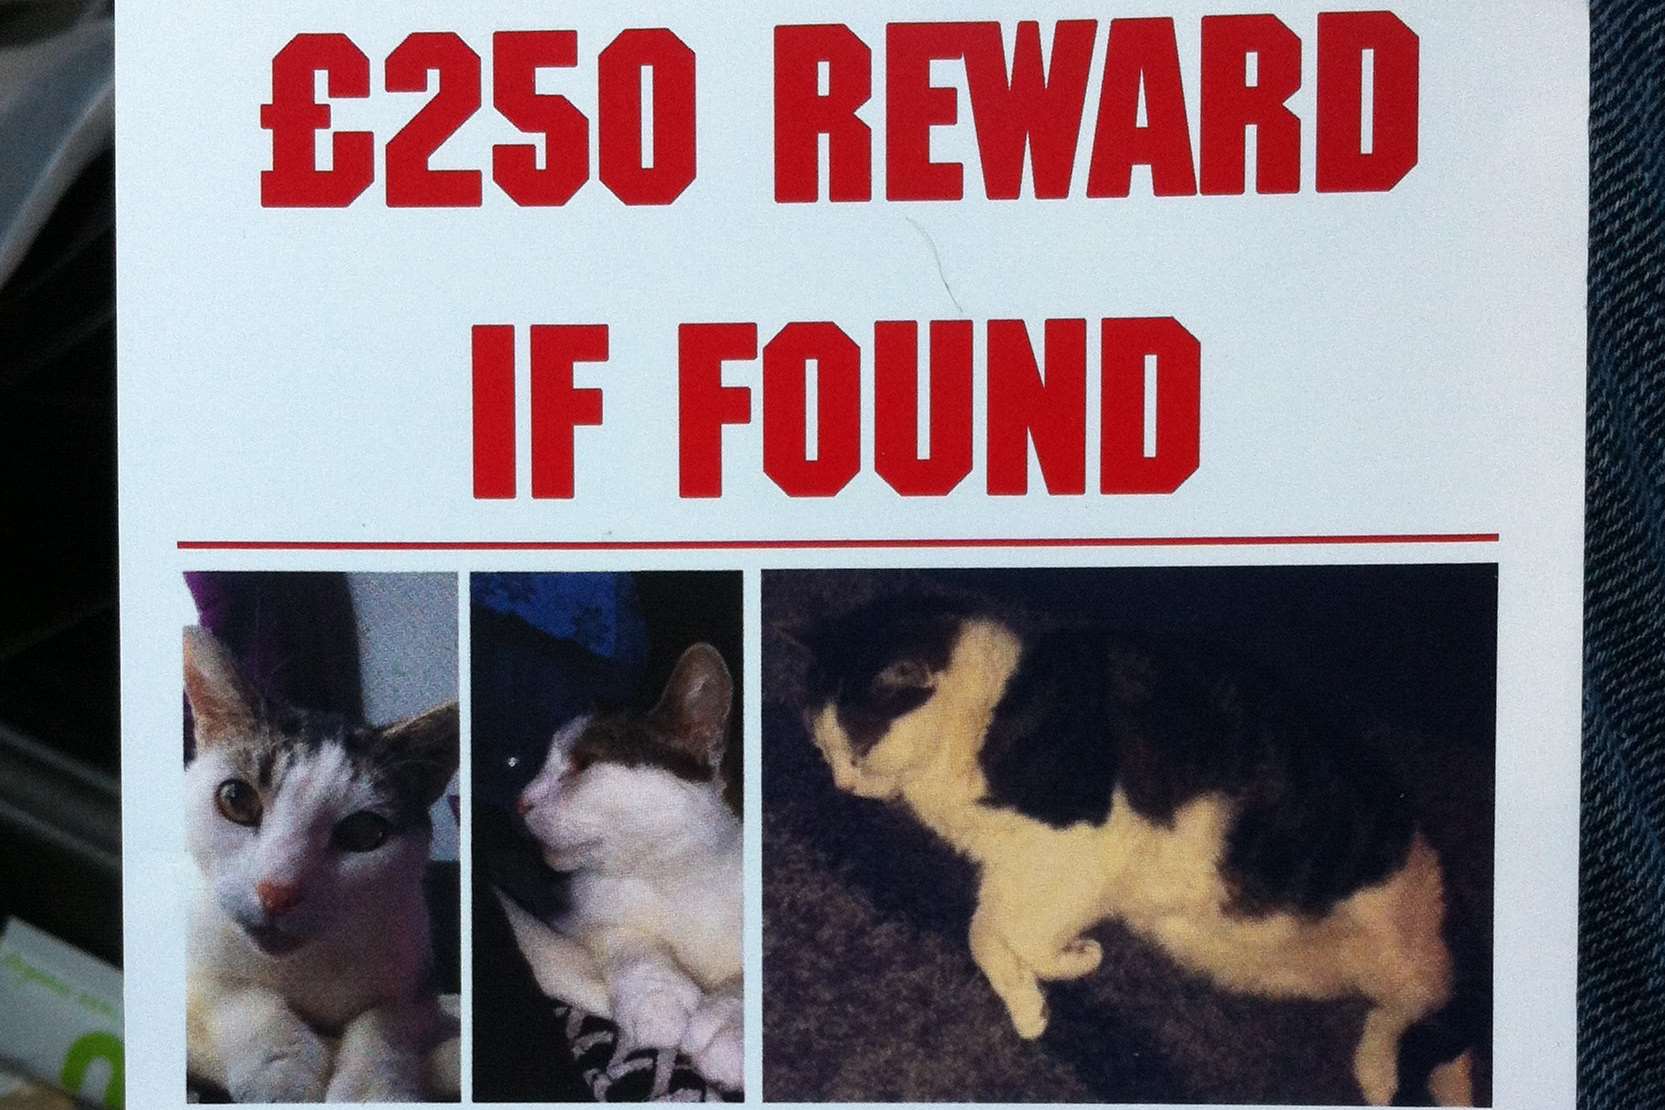 Kitty went missing on Boxing Day